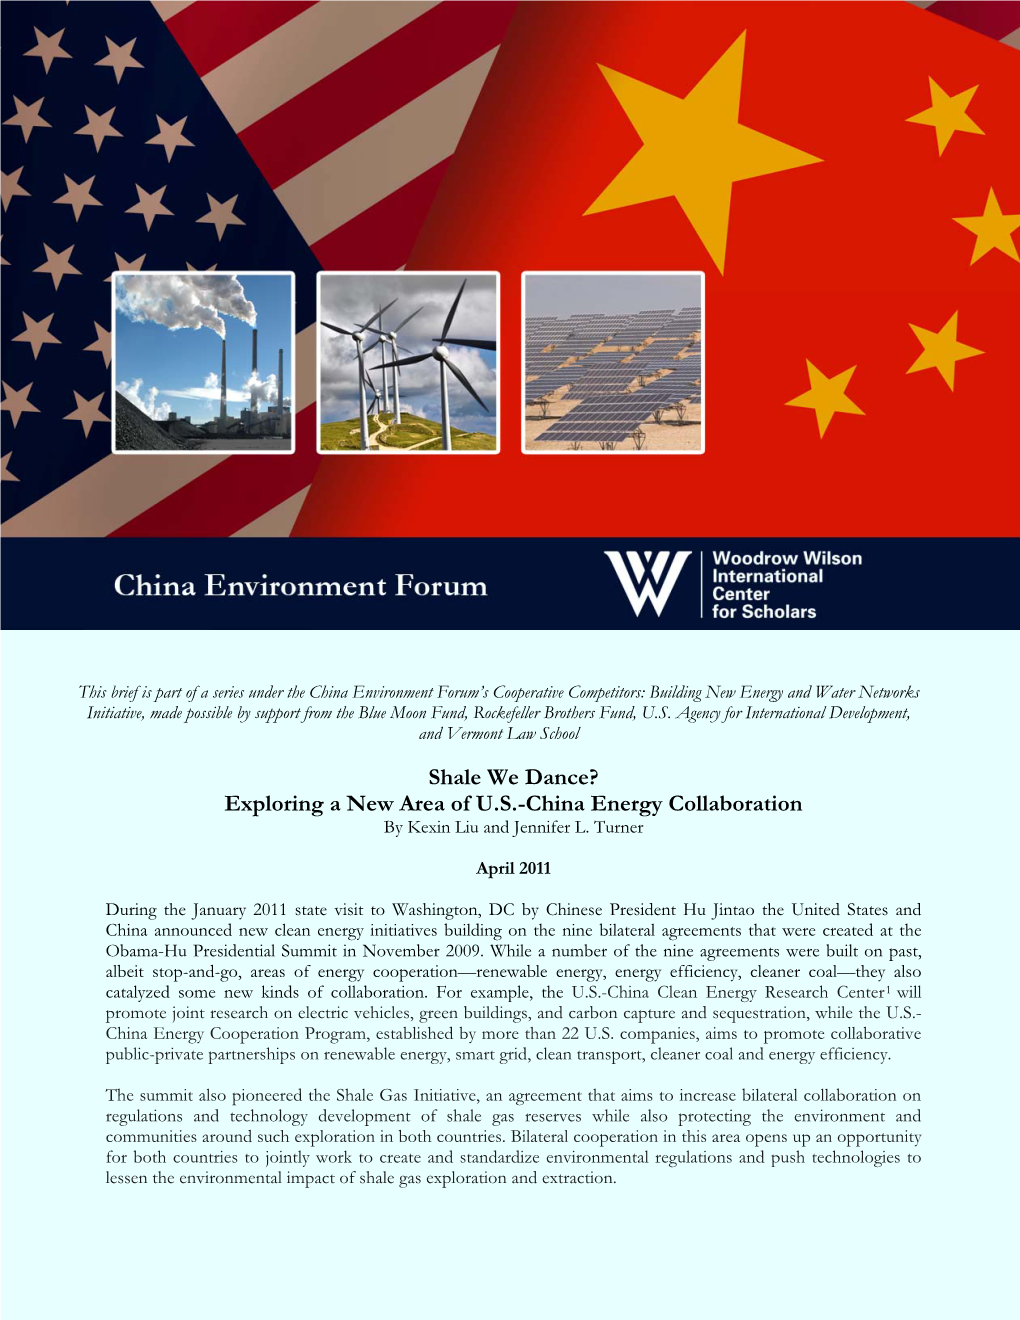 Shale We Dance? Exploring a New Area of U.S.-China Energy Collaboration by Kexin Liu and Jennifer L